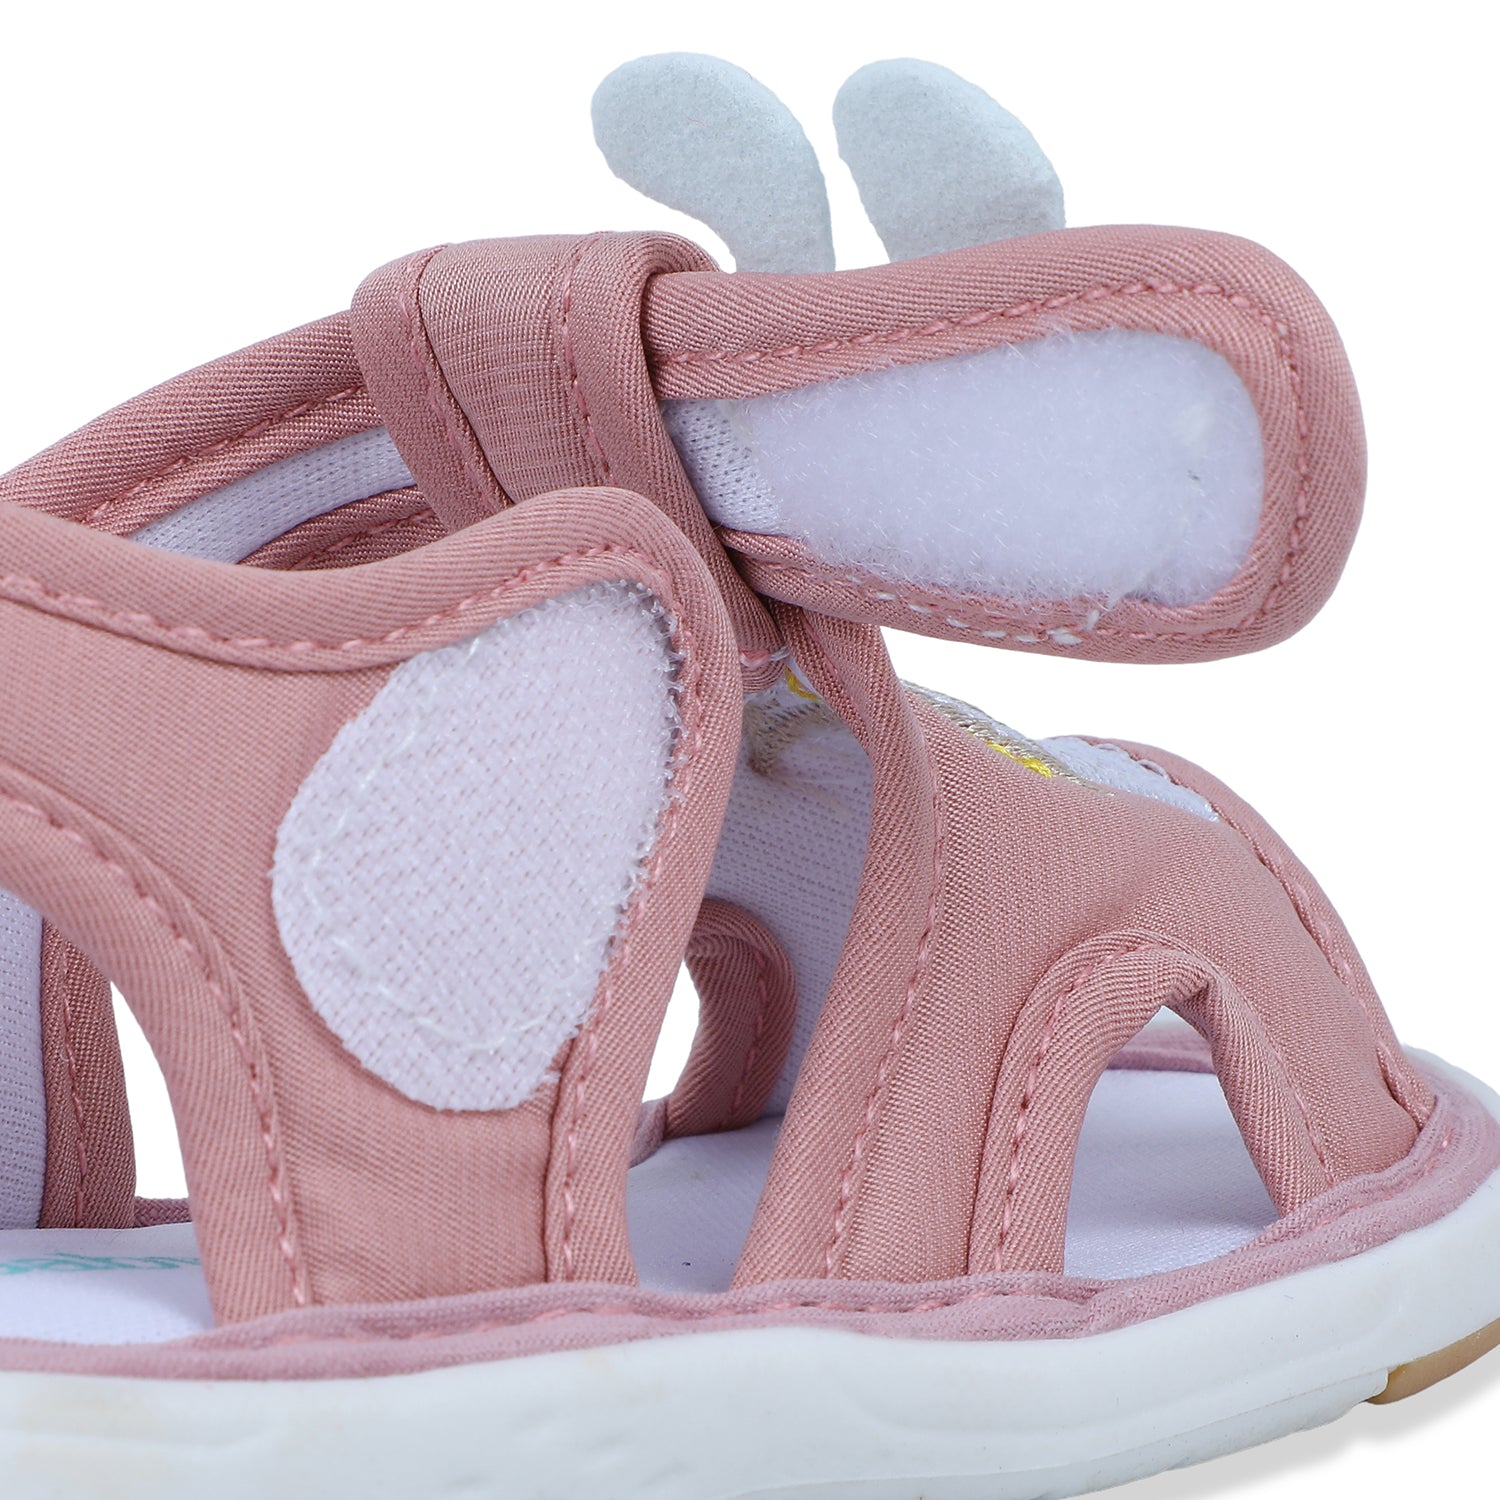 Baby Moo My Pet's House Chu-Chu Sound Breathable Anti-Skid Sandals - Pink - Baby Moo